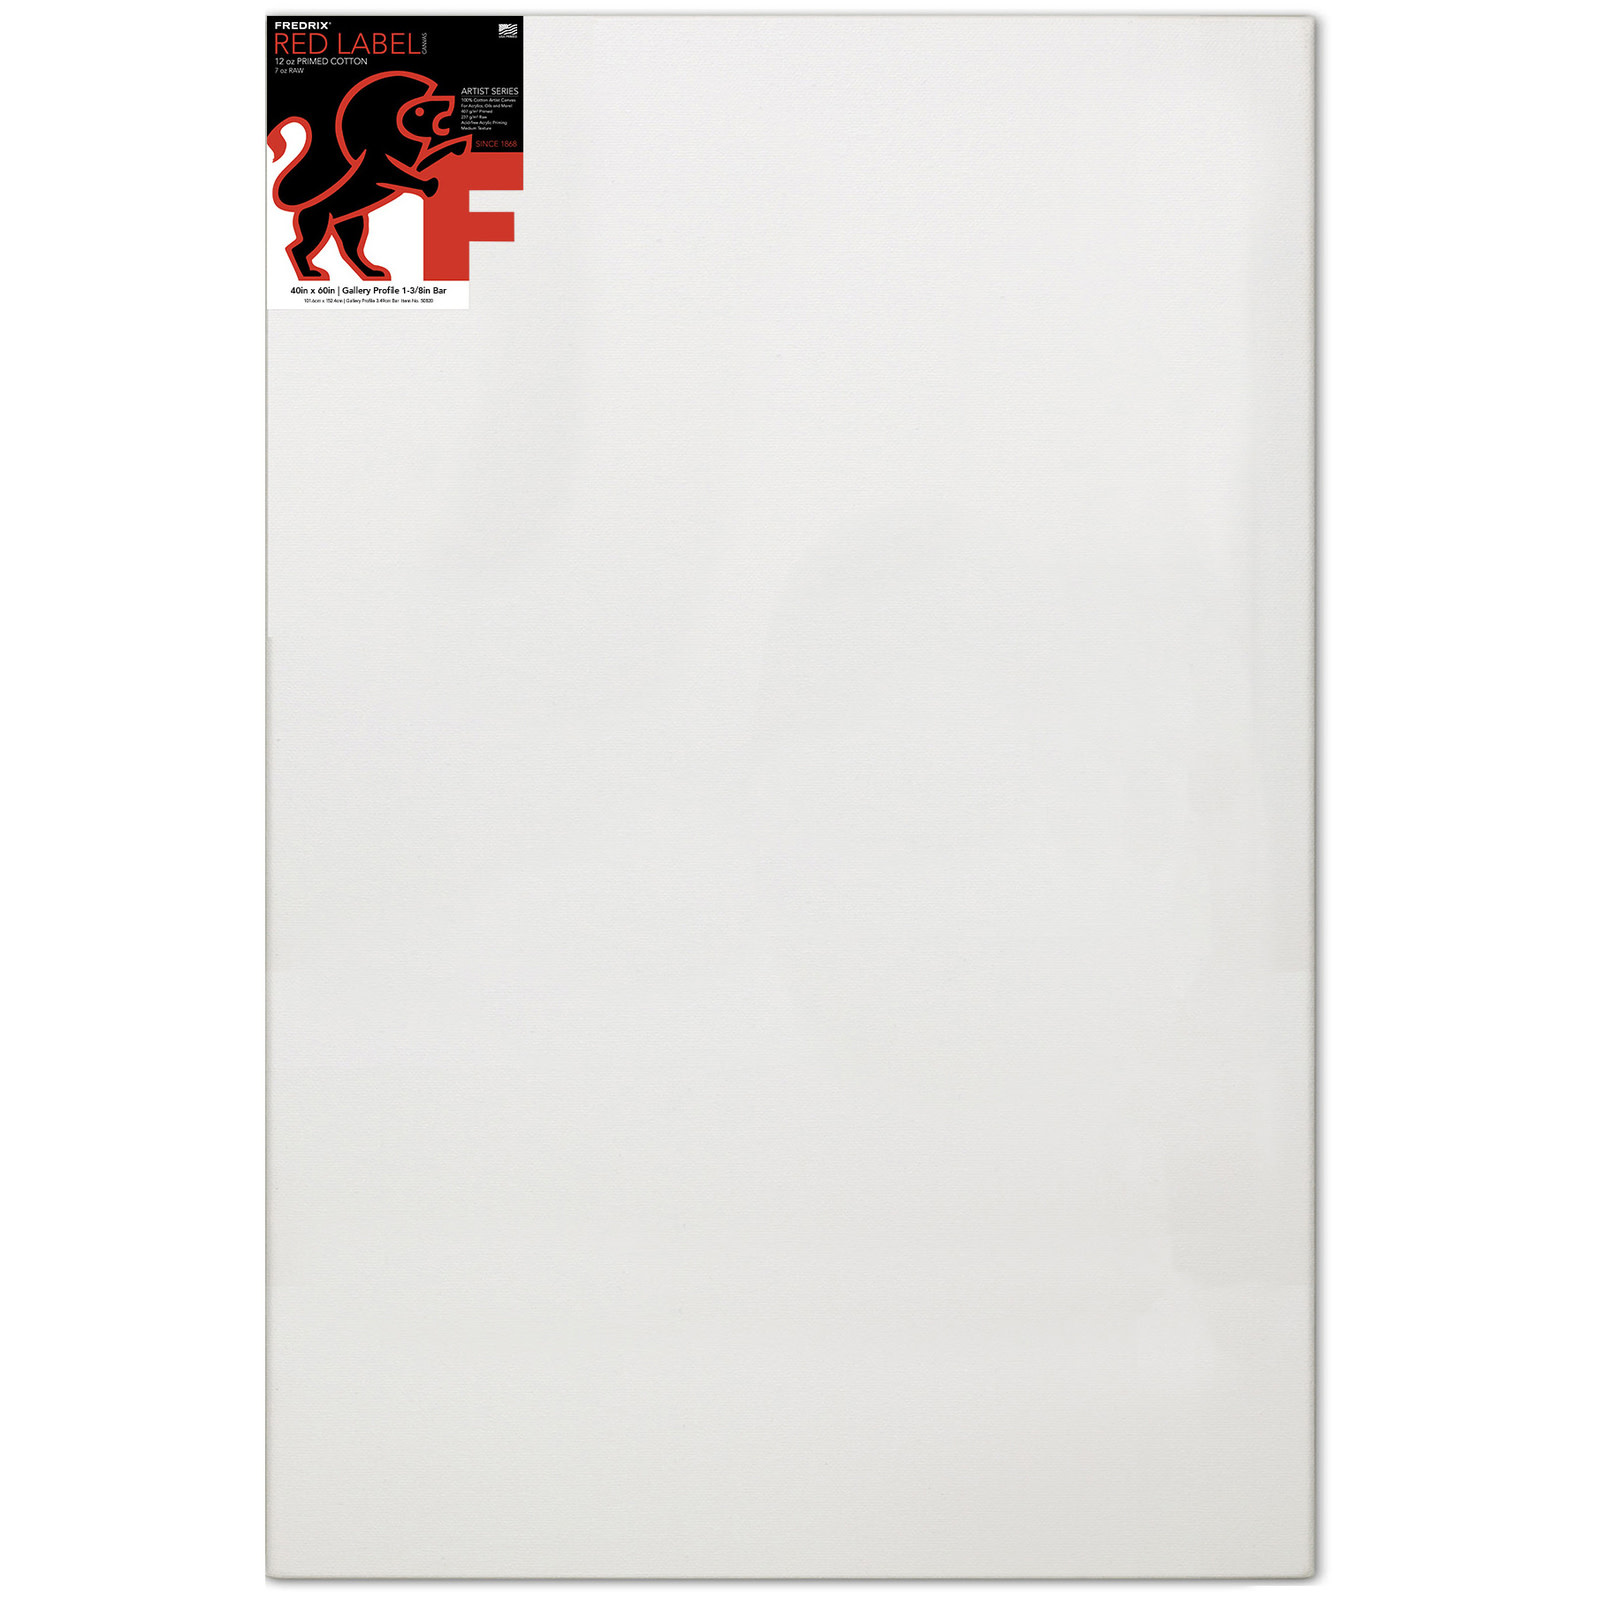 Fredrix Artist Series Red Label 12 oz. Primed Cotton Stretched Canvas, 1-3/8" Gallery Profile, 40" x 60"